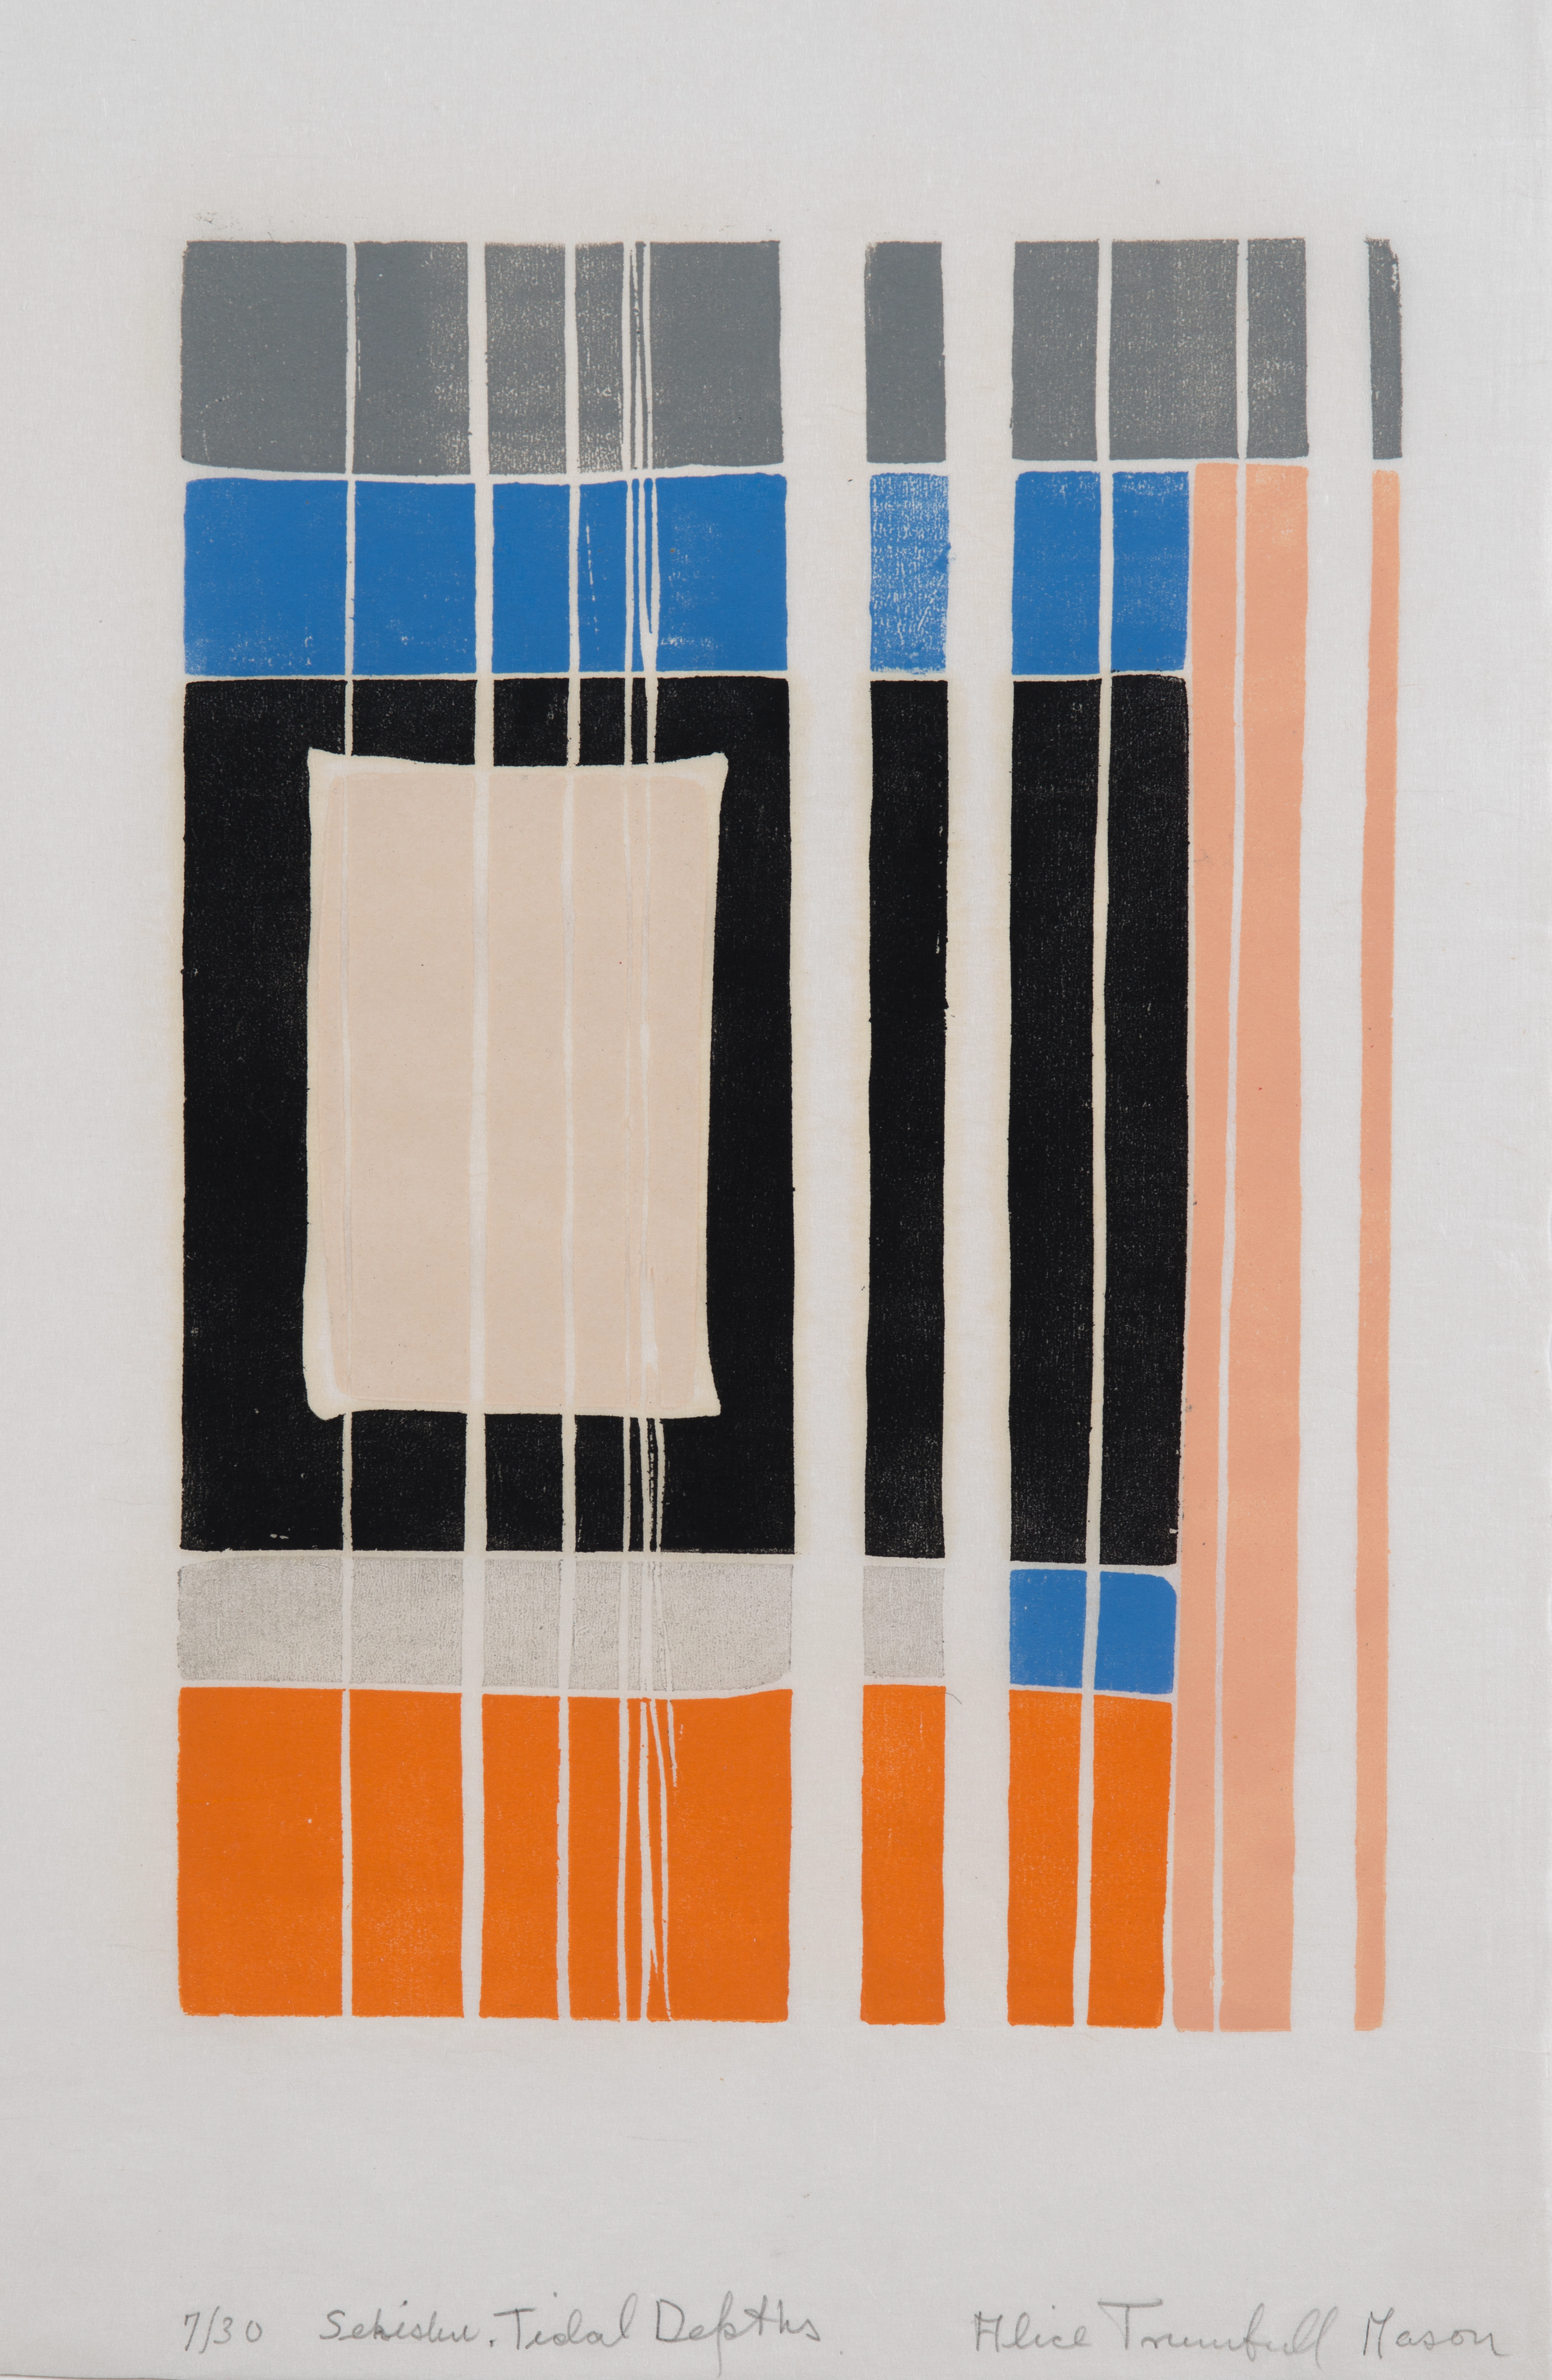 Abstract print on paper of grey, blue, black, and orange horizontal stripes, intersected by white vertical stripes. There is a light peach-colored rectangle punctuating the black stripe on the left, and a vertical light-peach toned stripe to the right. A white border surrounds the composition.